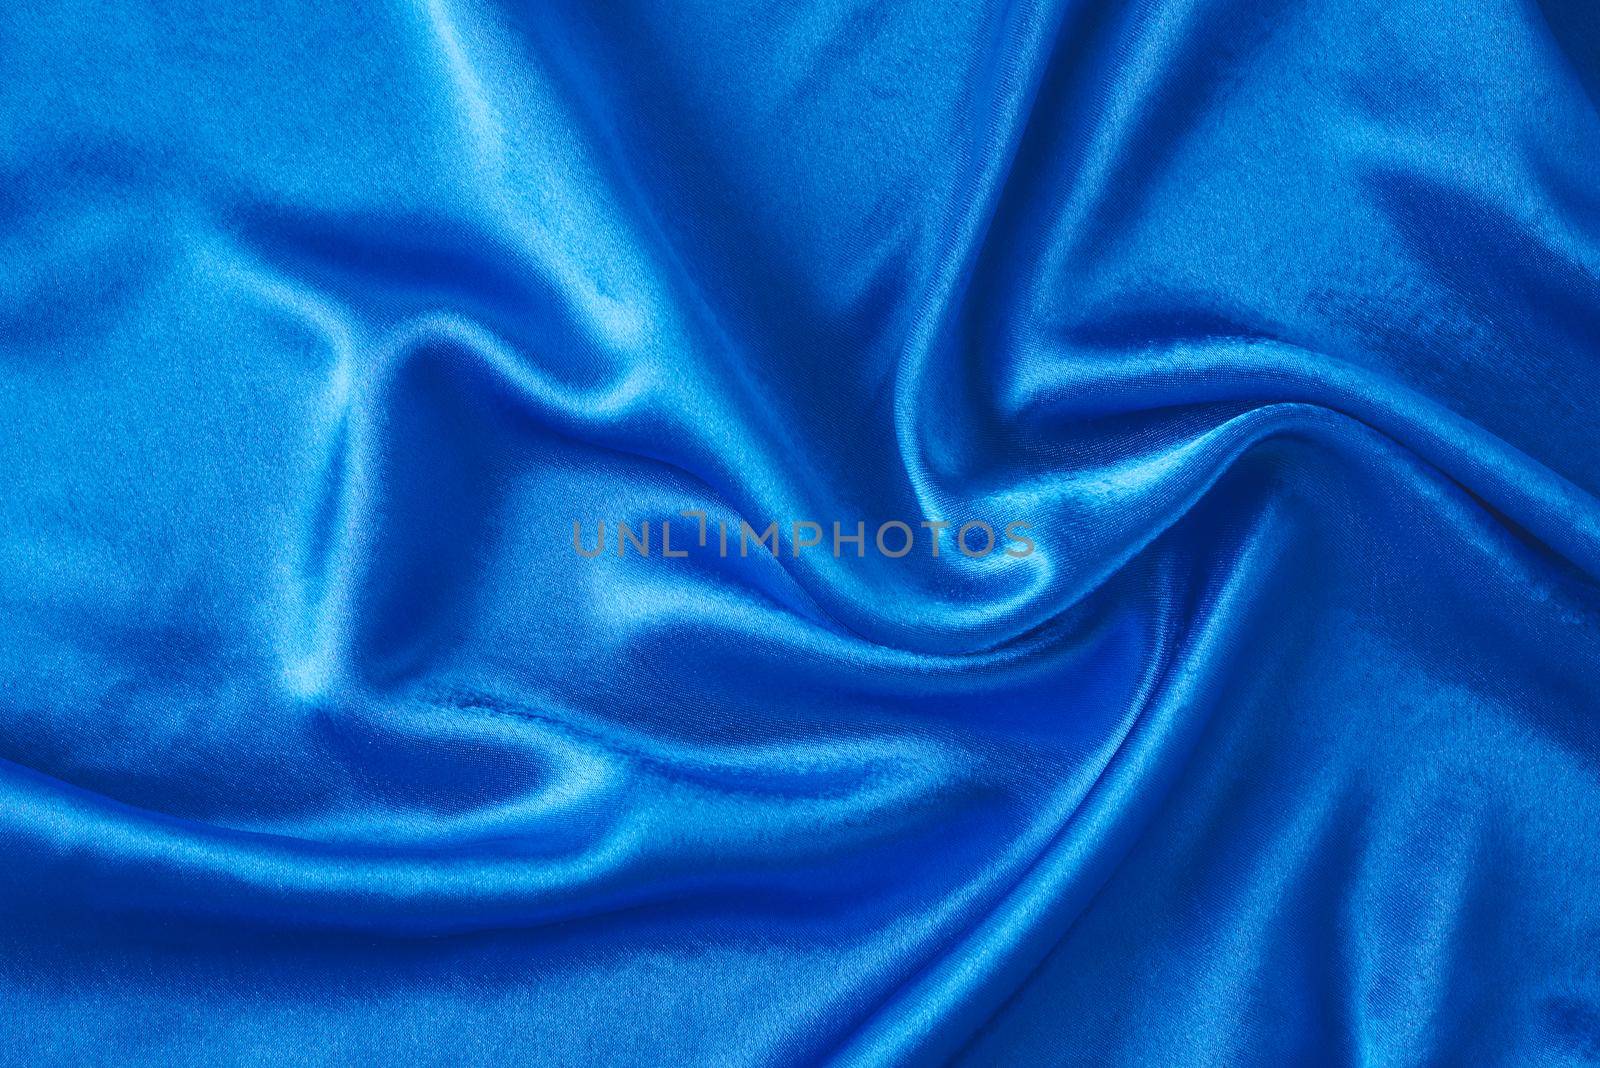 Blue silk background with folds. Abstract texture of rippled satin surface